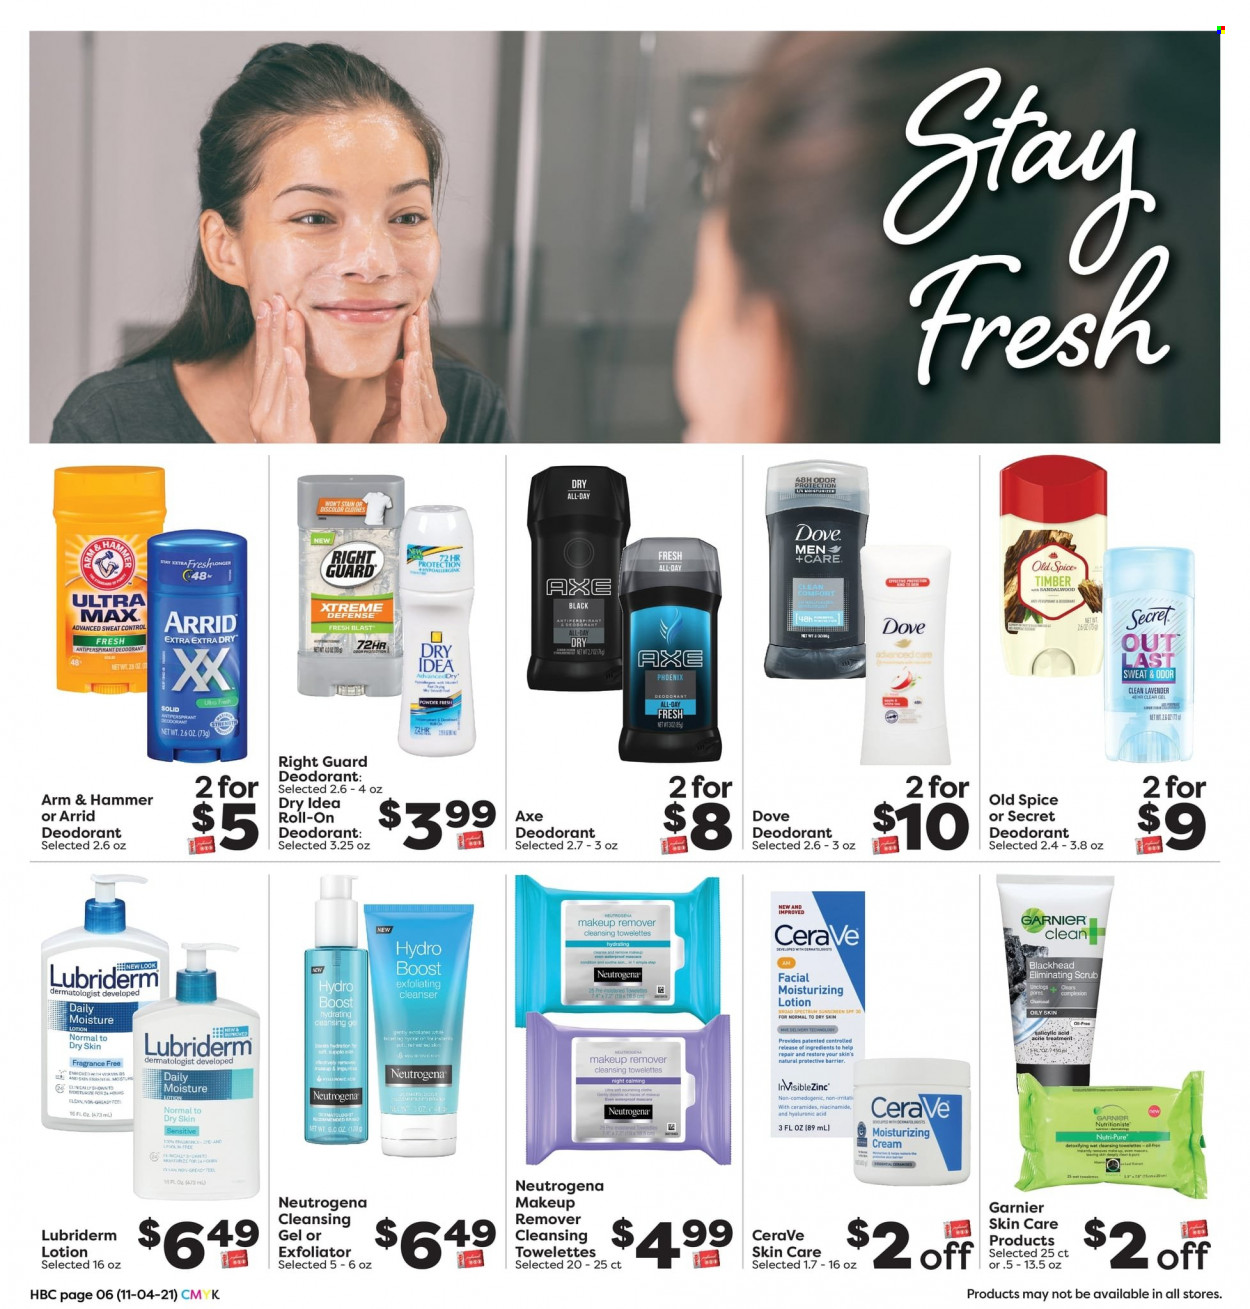 thumbnail - Weis Flyer - 11/04/2021 - 12/02/2021 - Sales products - ARM & HAMMER, spice, Boost, Ron Pelicano, Dove, Old Spice, CeraVe, cleanser, Garnier, Neutrogena, Niacinamide, body lotion, Lubriderm, anti-perspirant, roll-on, deodorant. Page 6.